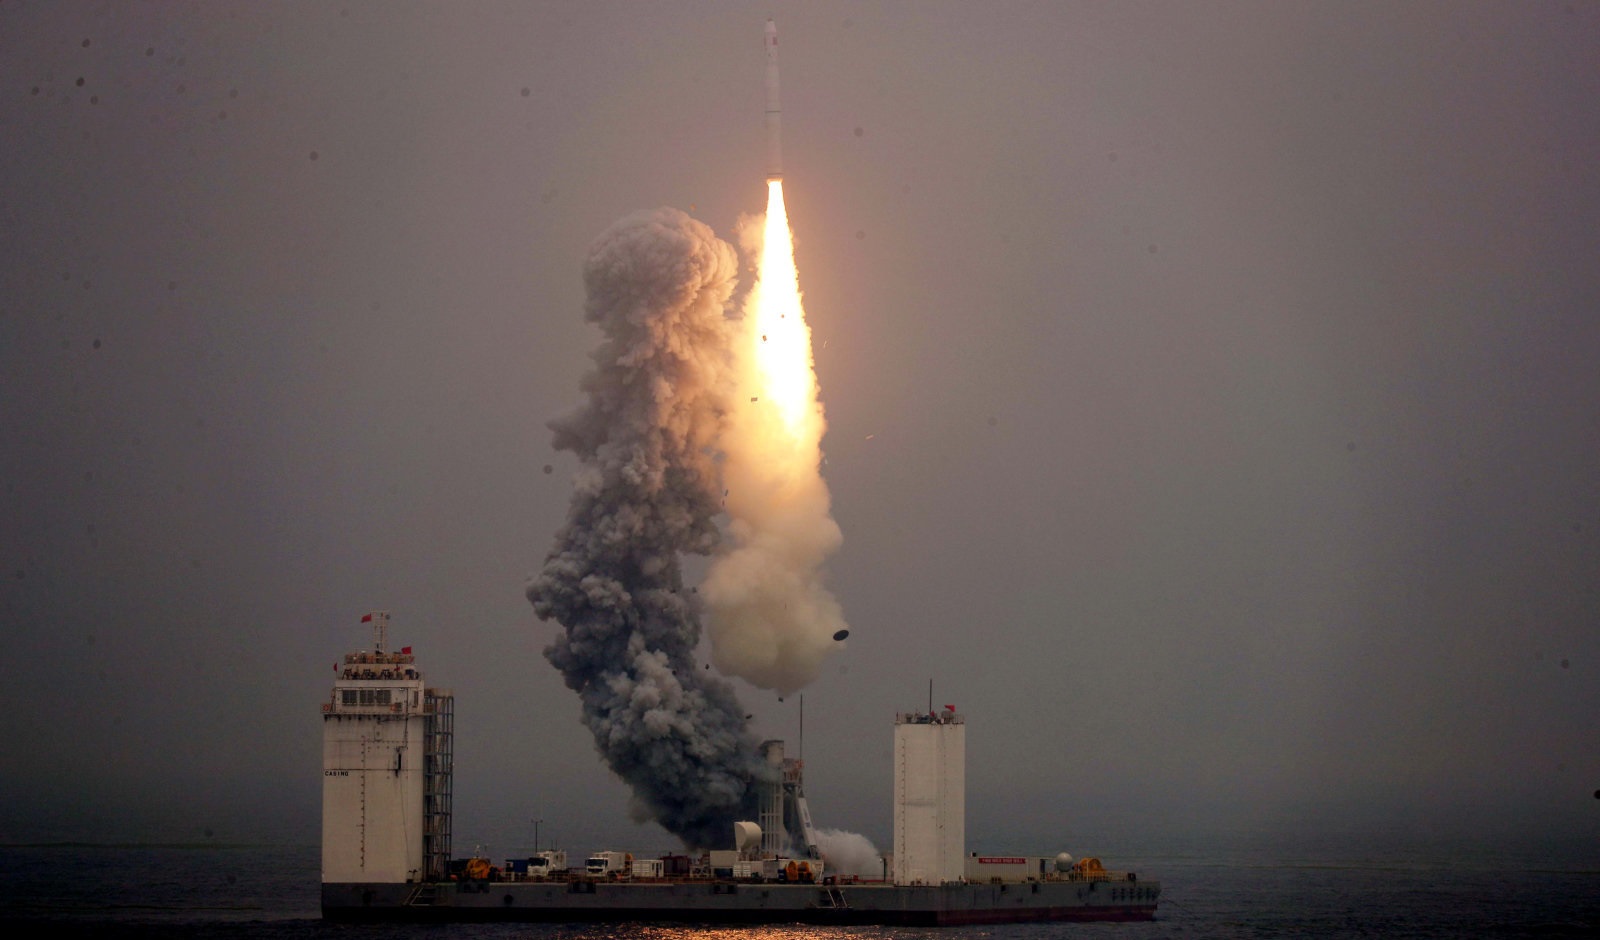 China launches a space rocket from a ship for the first time